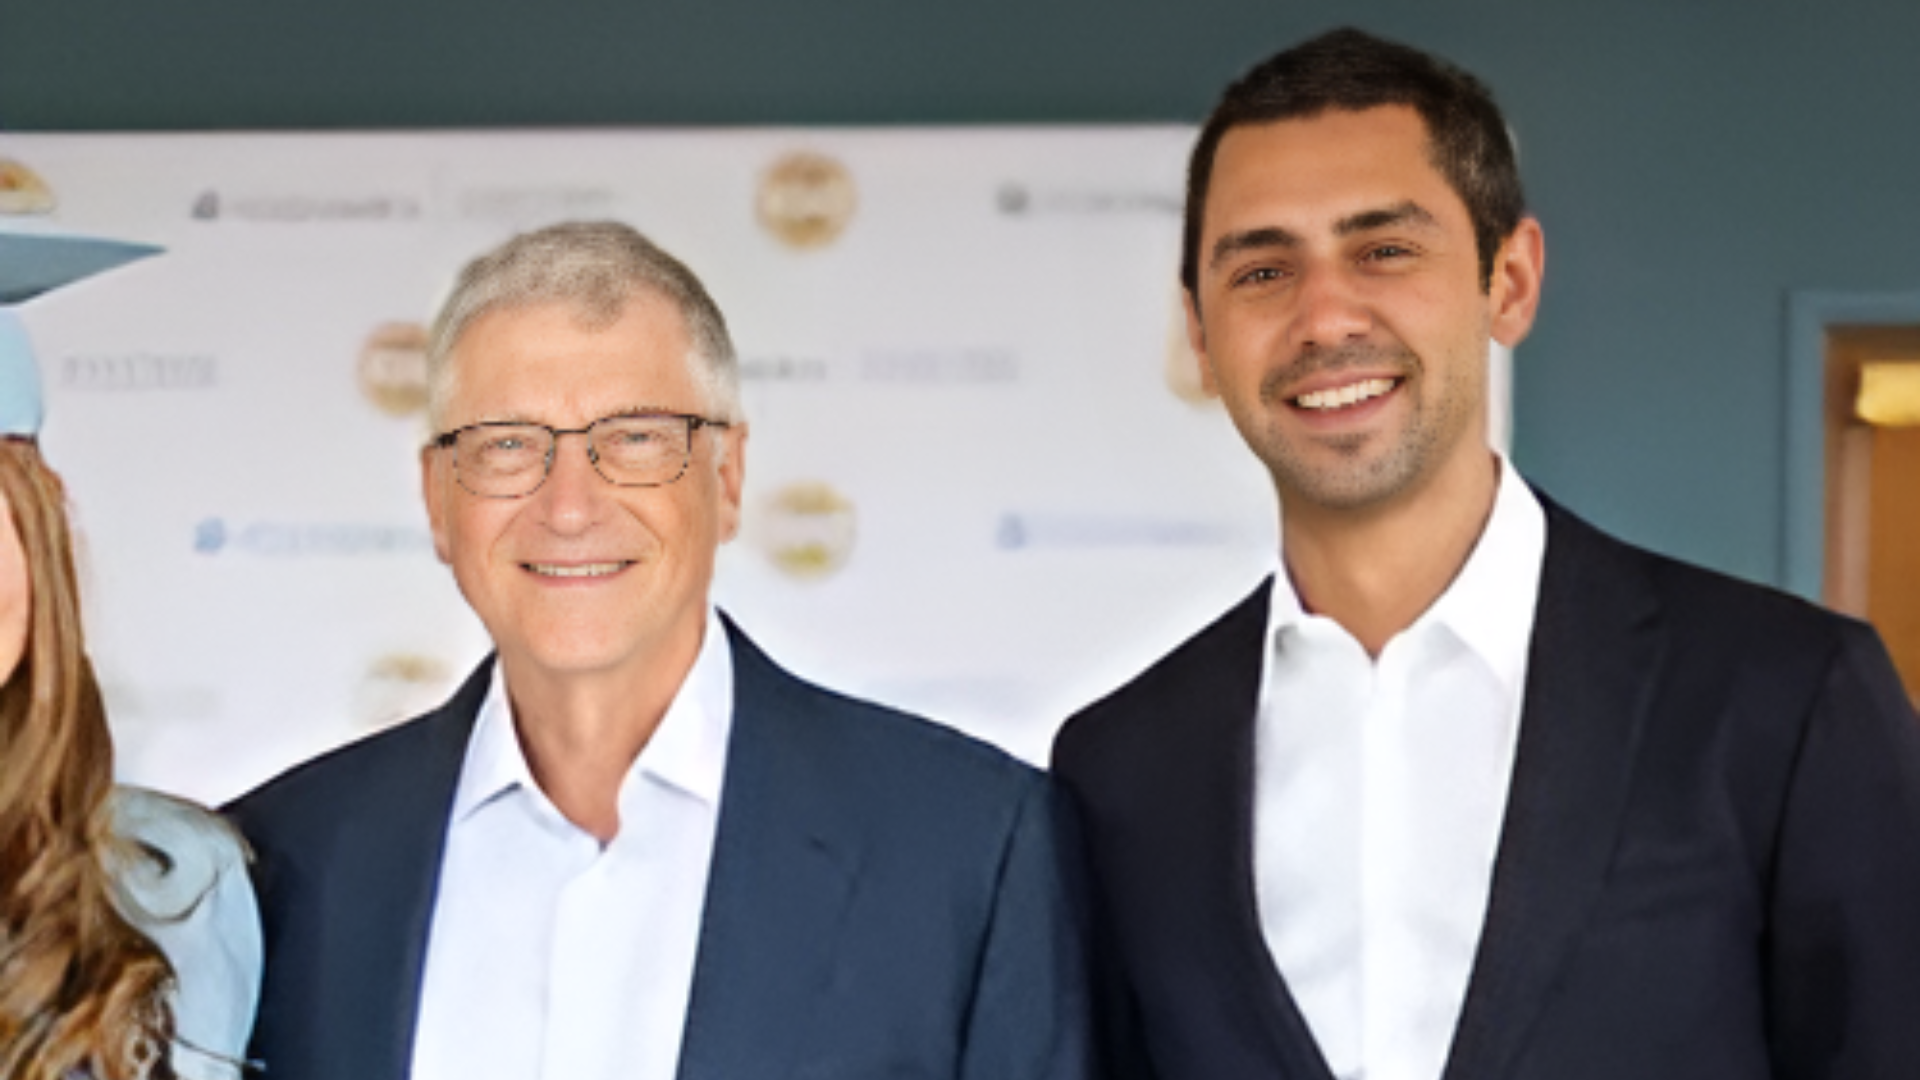 Paris Olympics 2024: Bill Gates’s Son-in-Law Nayel Nassar To Represent Egypt in Equestrian Events